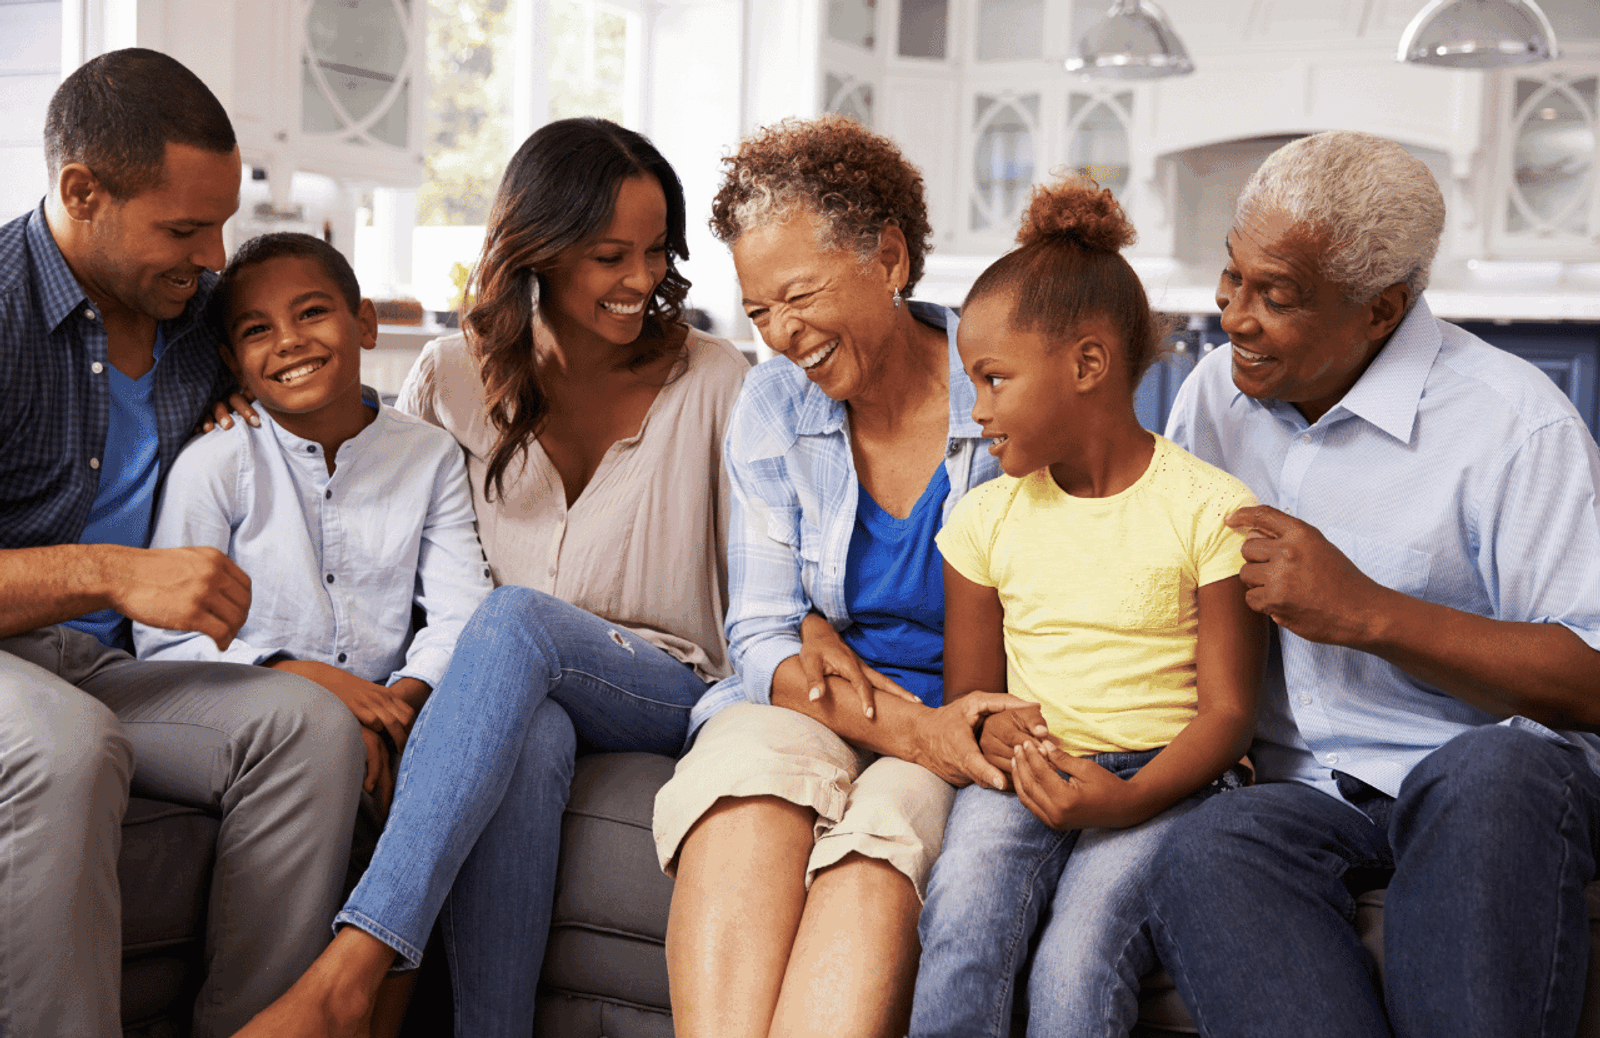 A Black multi-generational family sits on a couch together all smiling and laughing. There are two children, and four sets of adults, presumably the children's parents and grandparents.